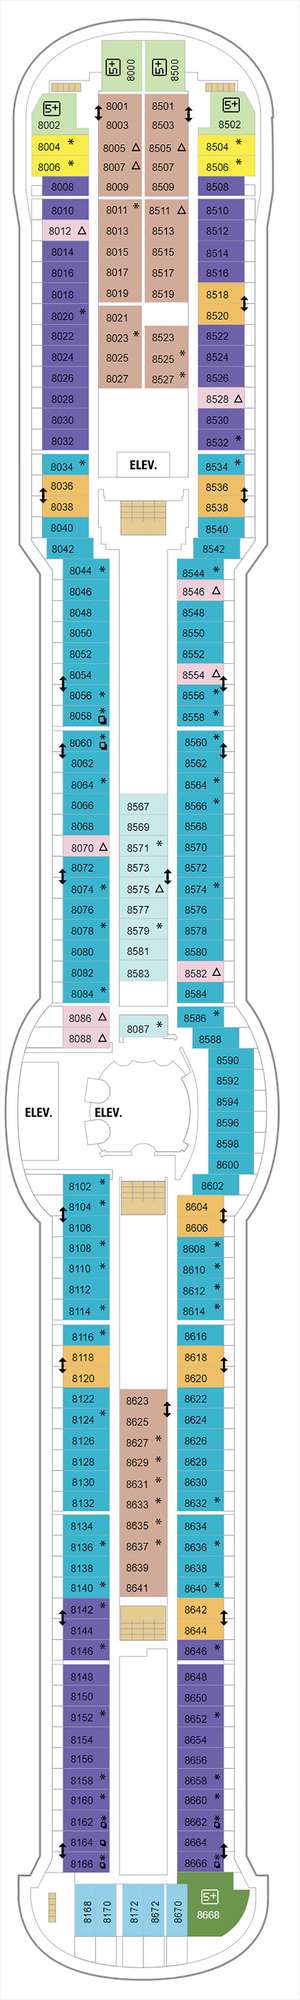 Deck plan for Jewel of the Seas